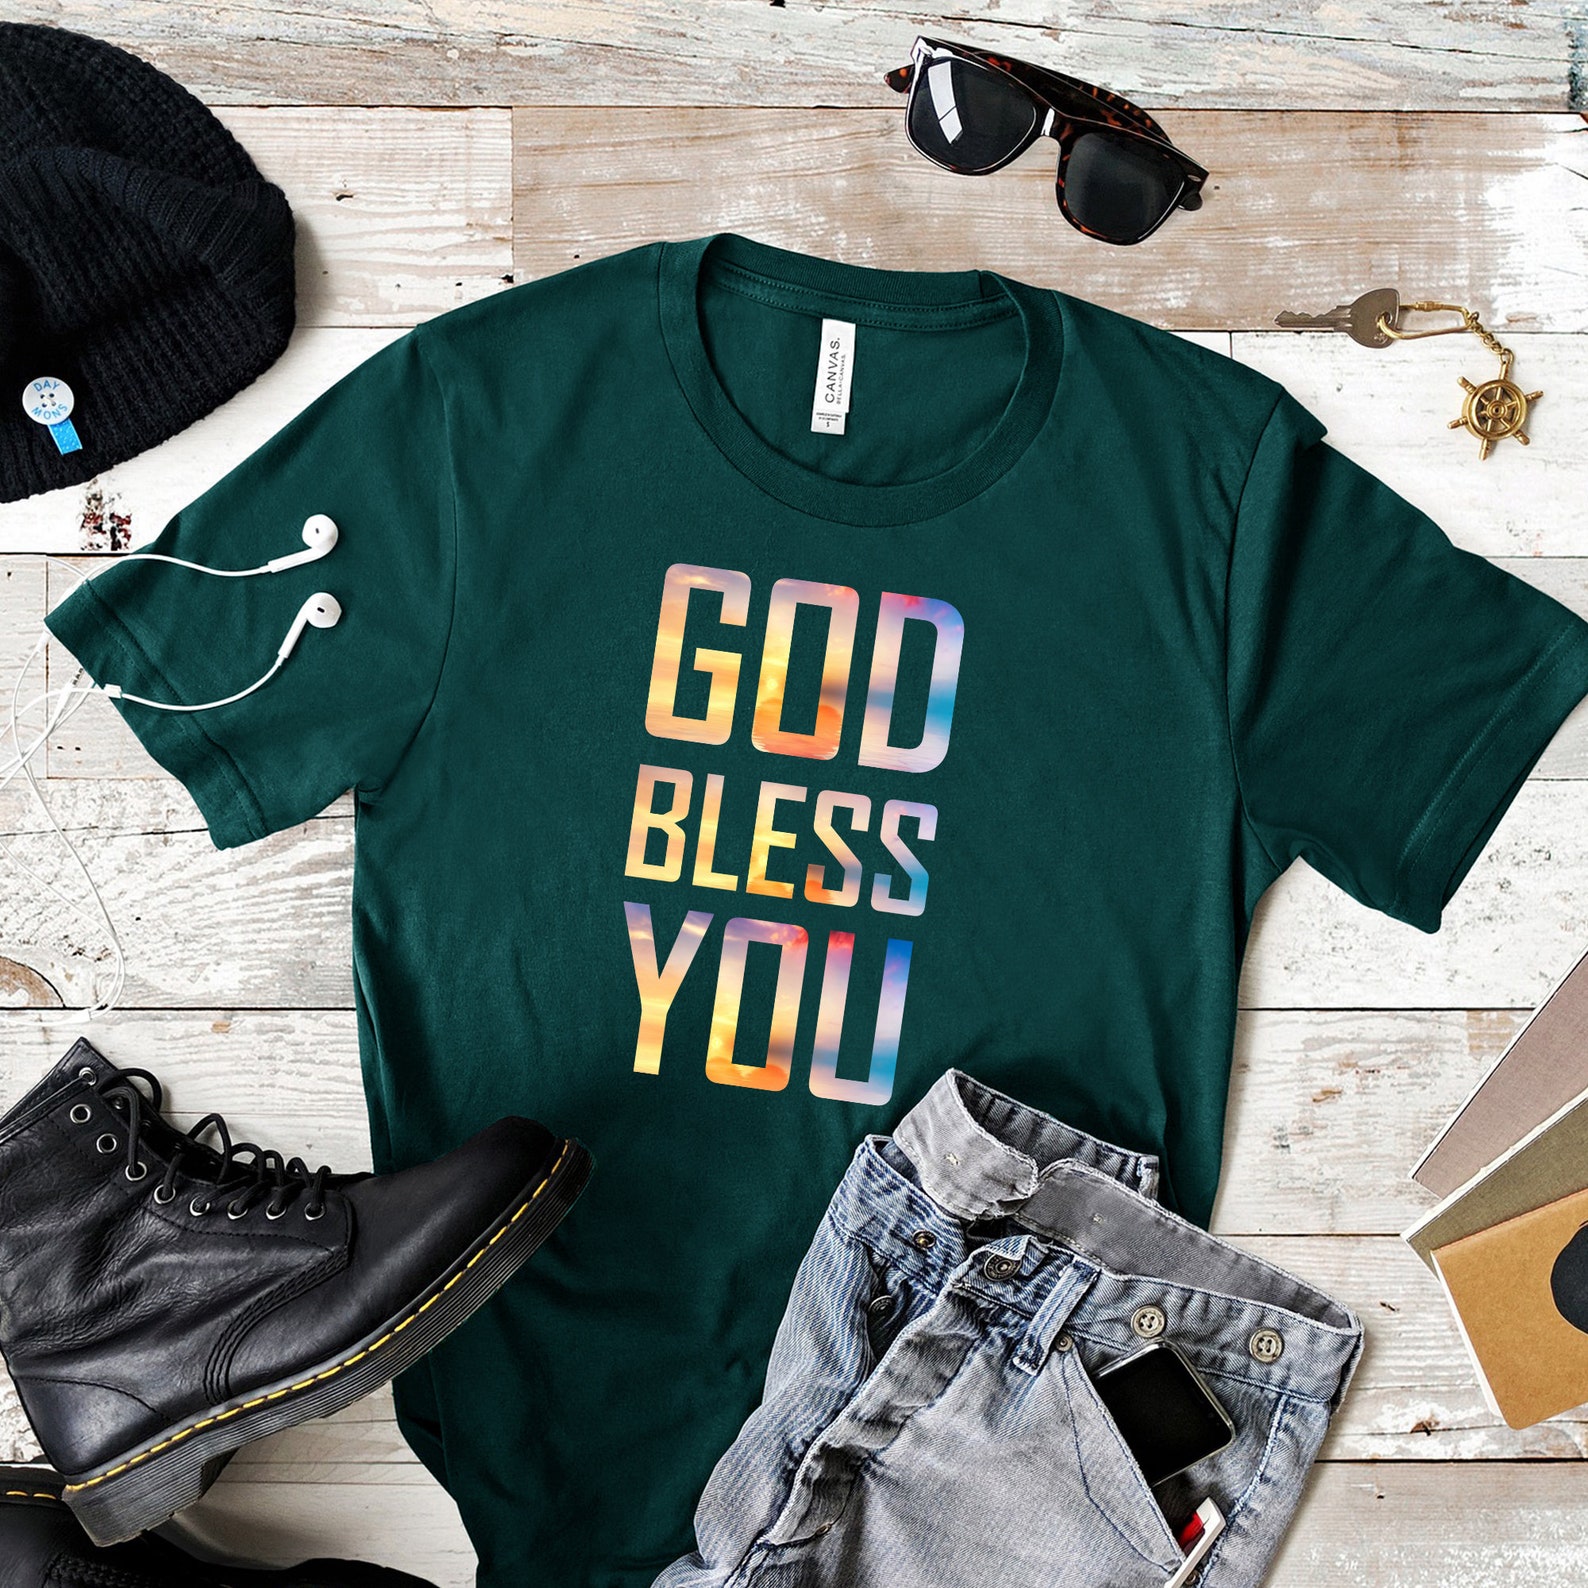 god bless you on your journey tshirt